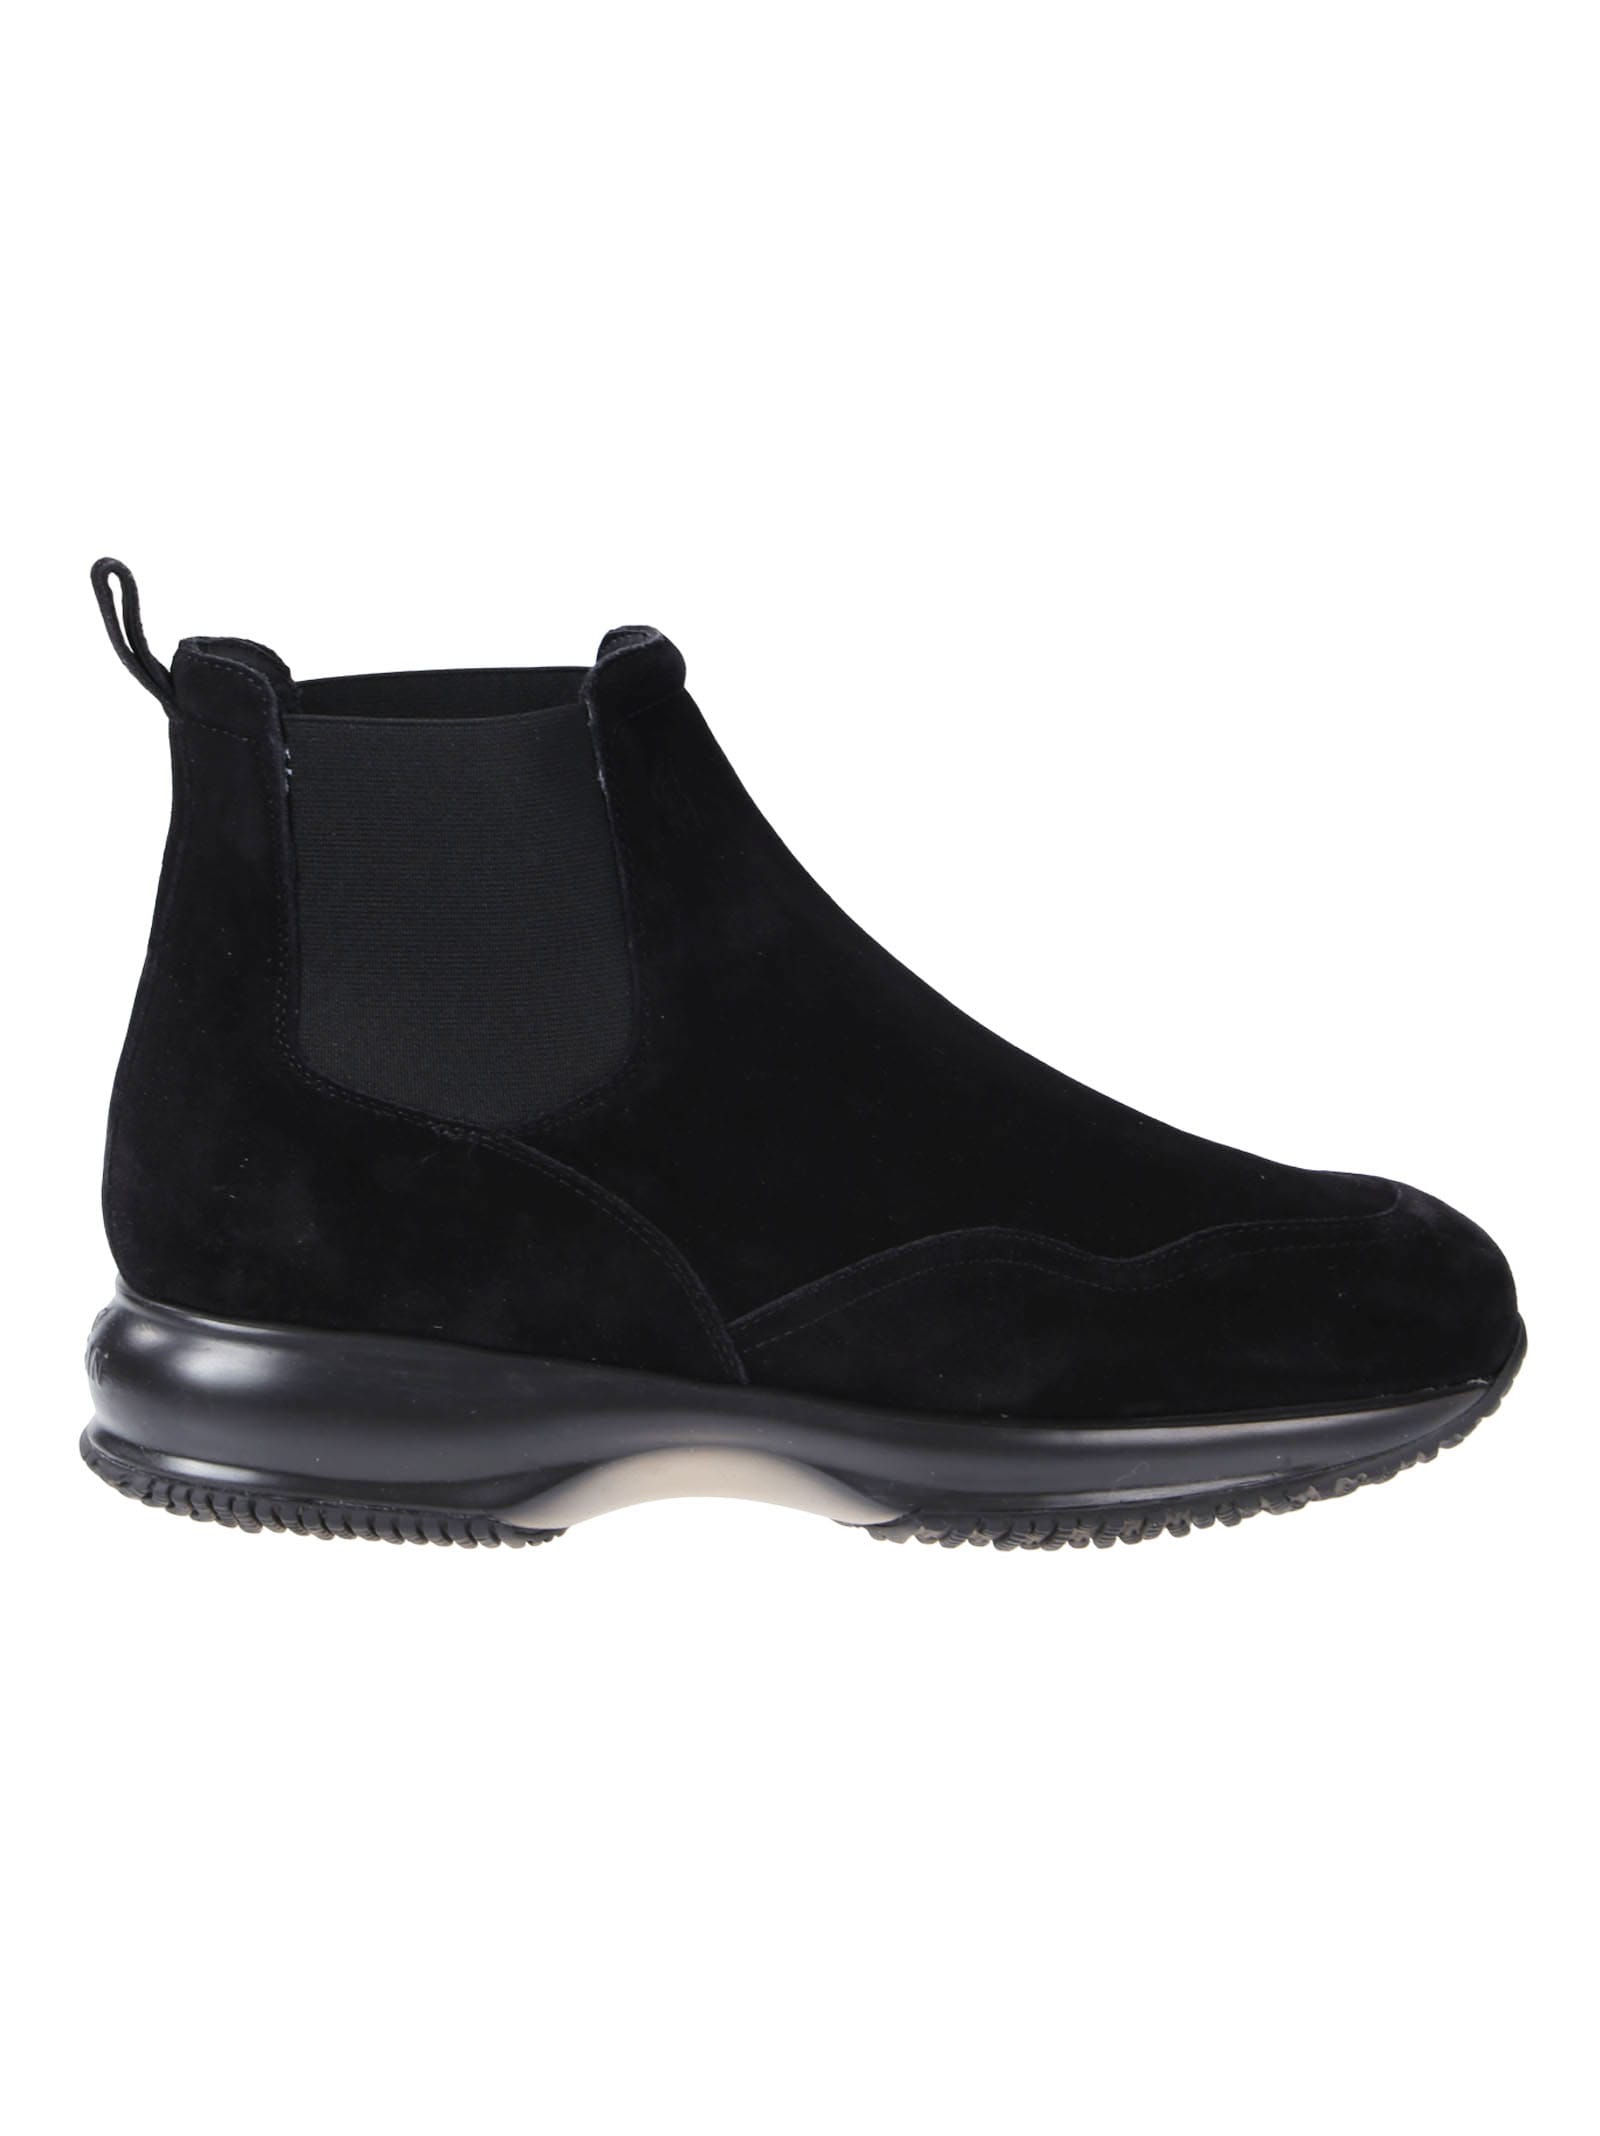 Hogan Interactive Chelsea Ankle Boots